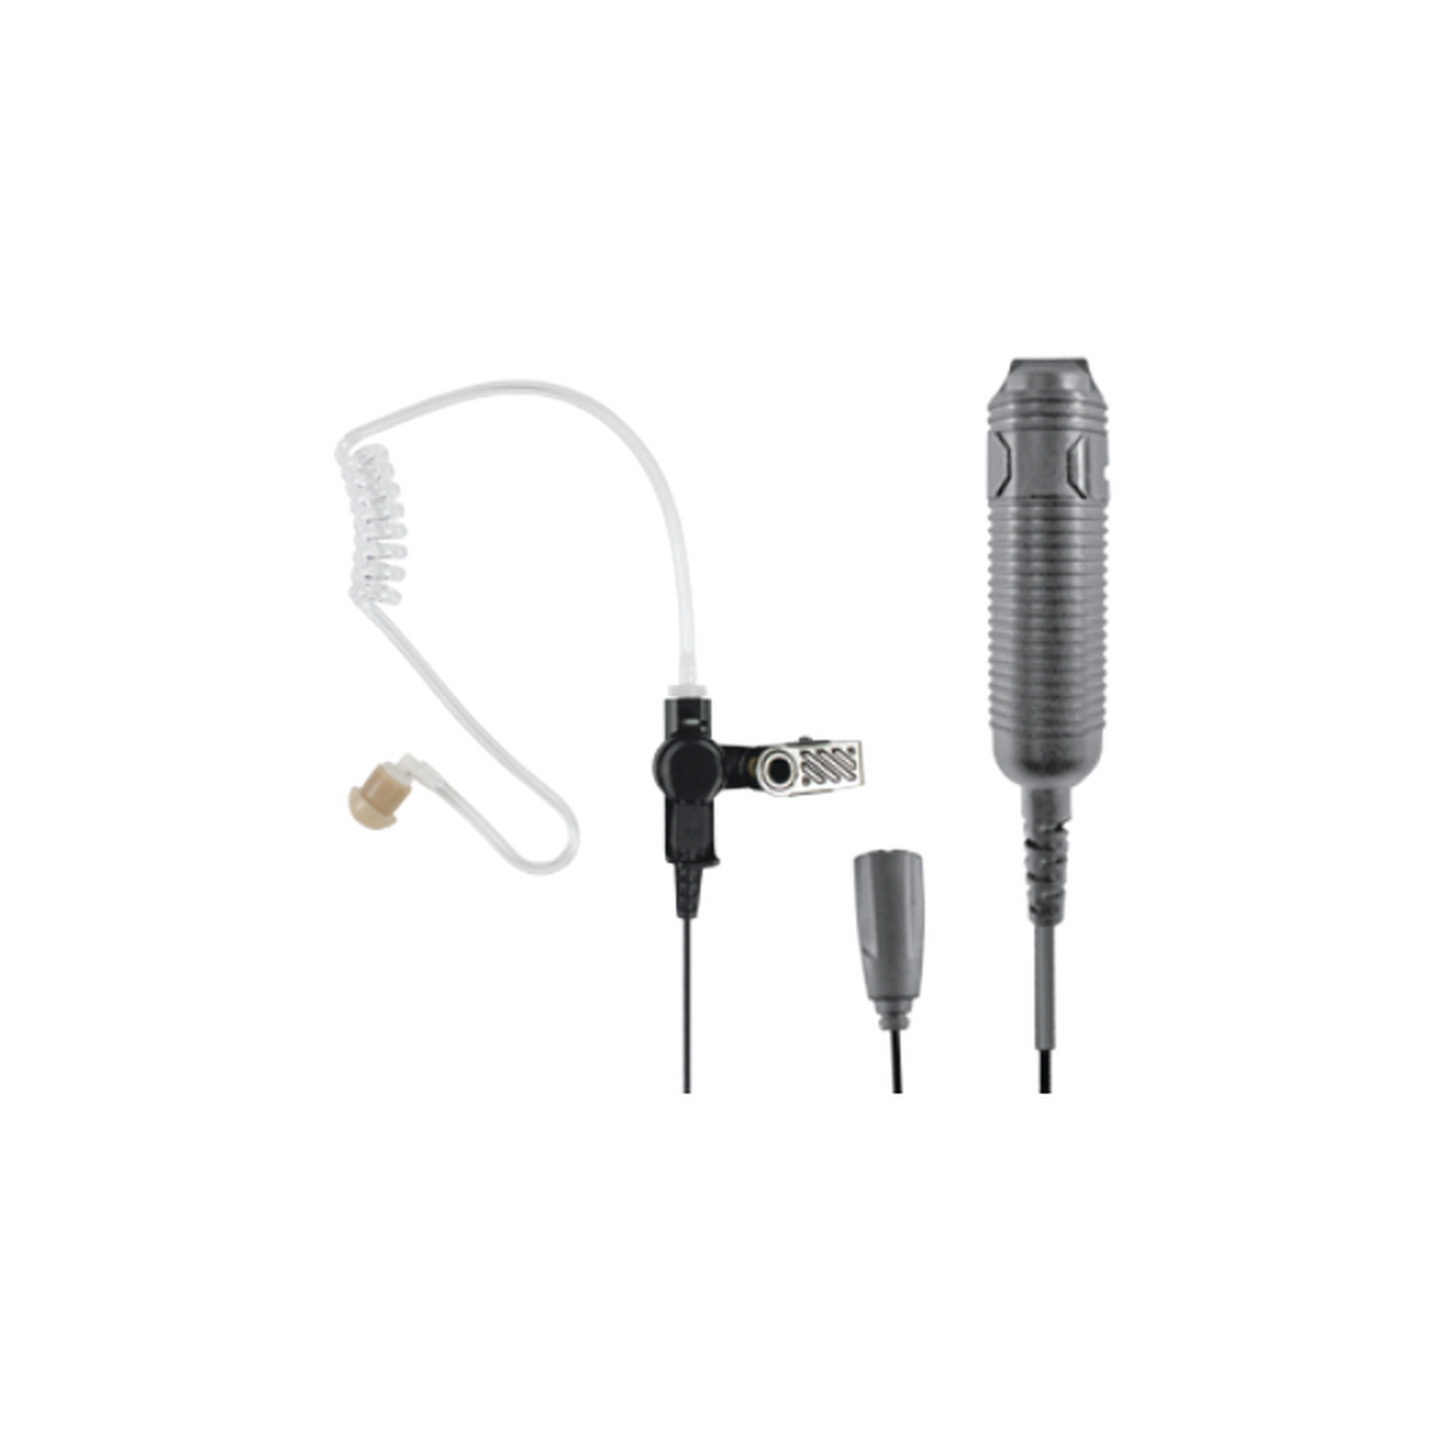 Heavy Duty 3-Wire Surveillance Kit: Features acoustic tube earphone with TWIST CONNECTOR, remote PTT switch and low-profile lapel microphone. Straight cable.